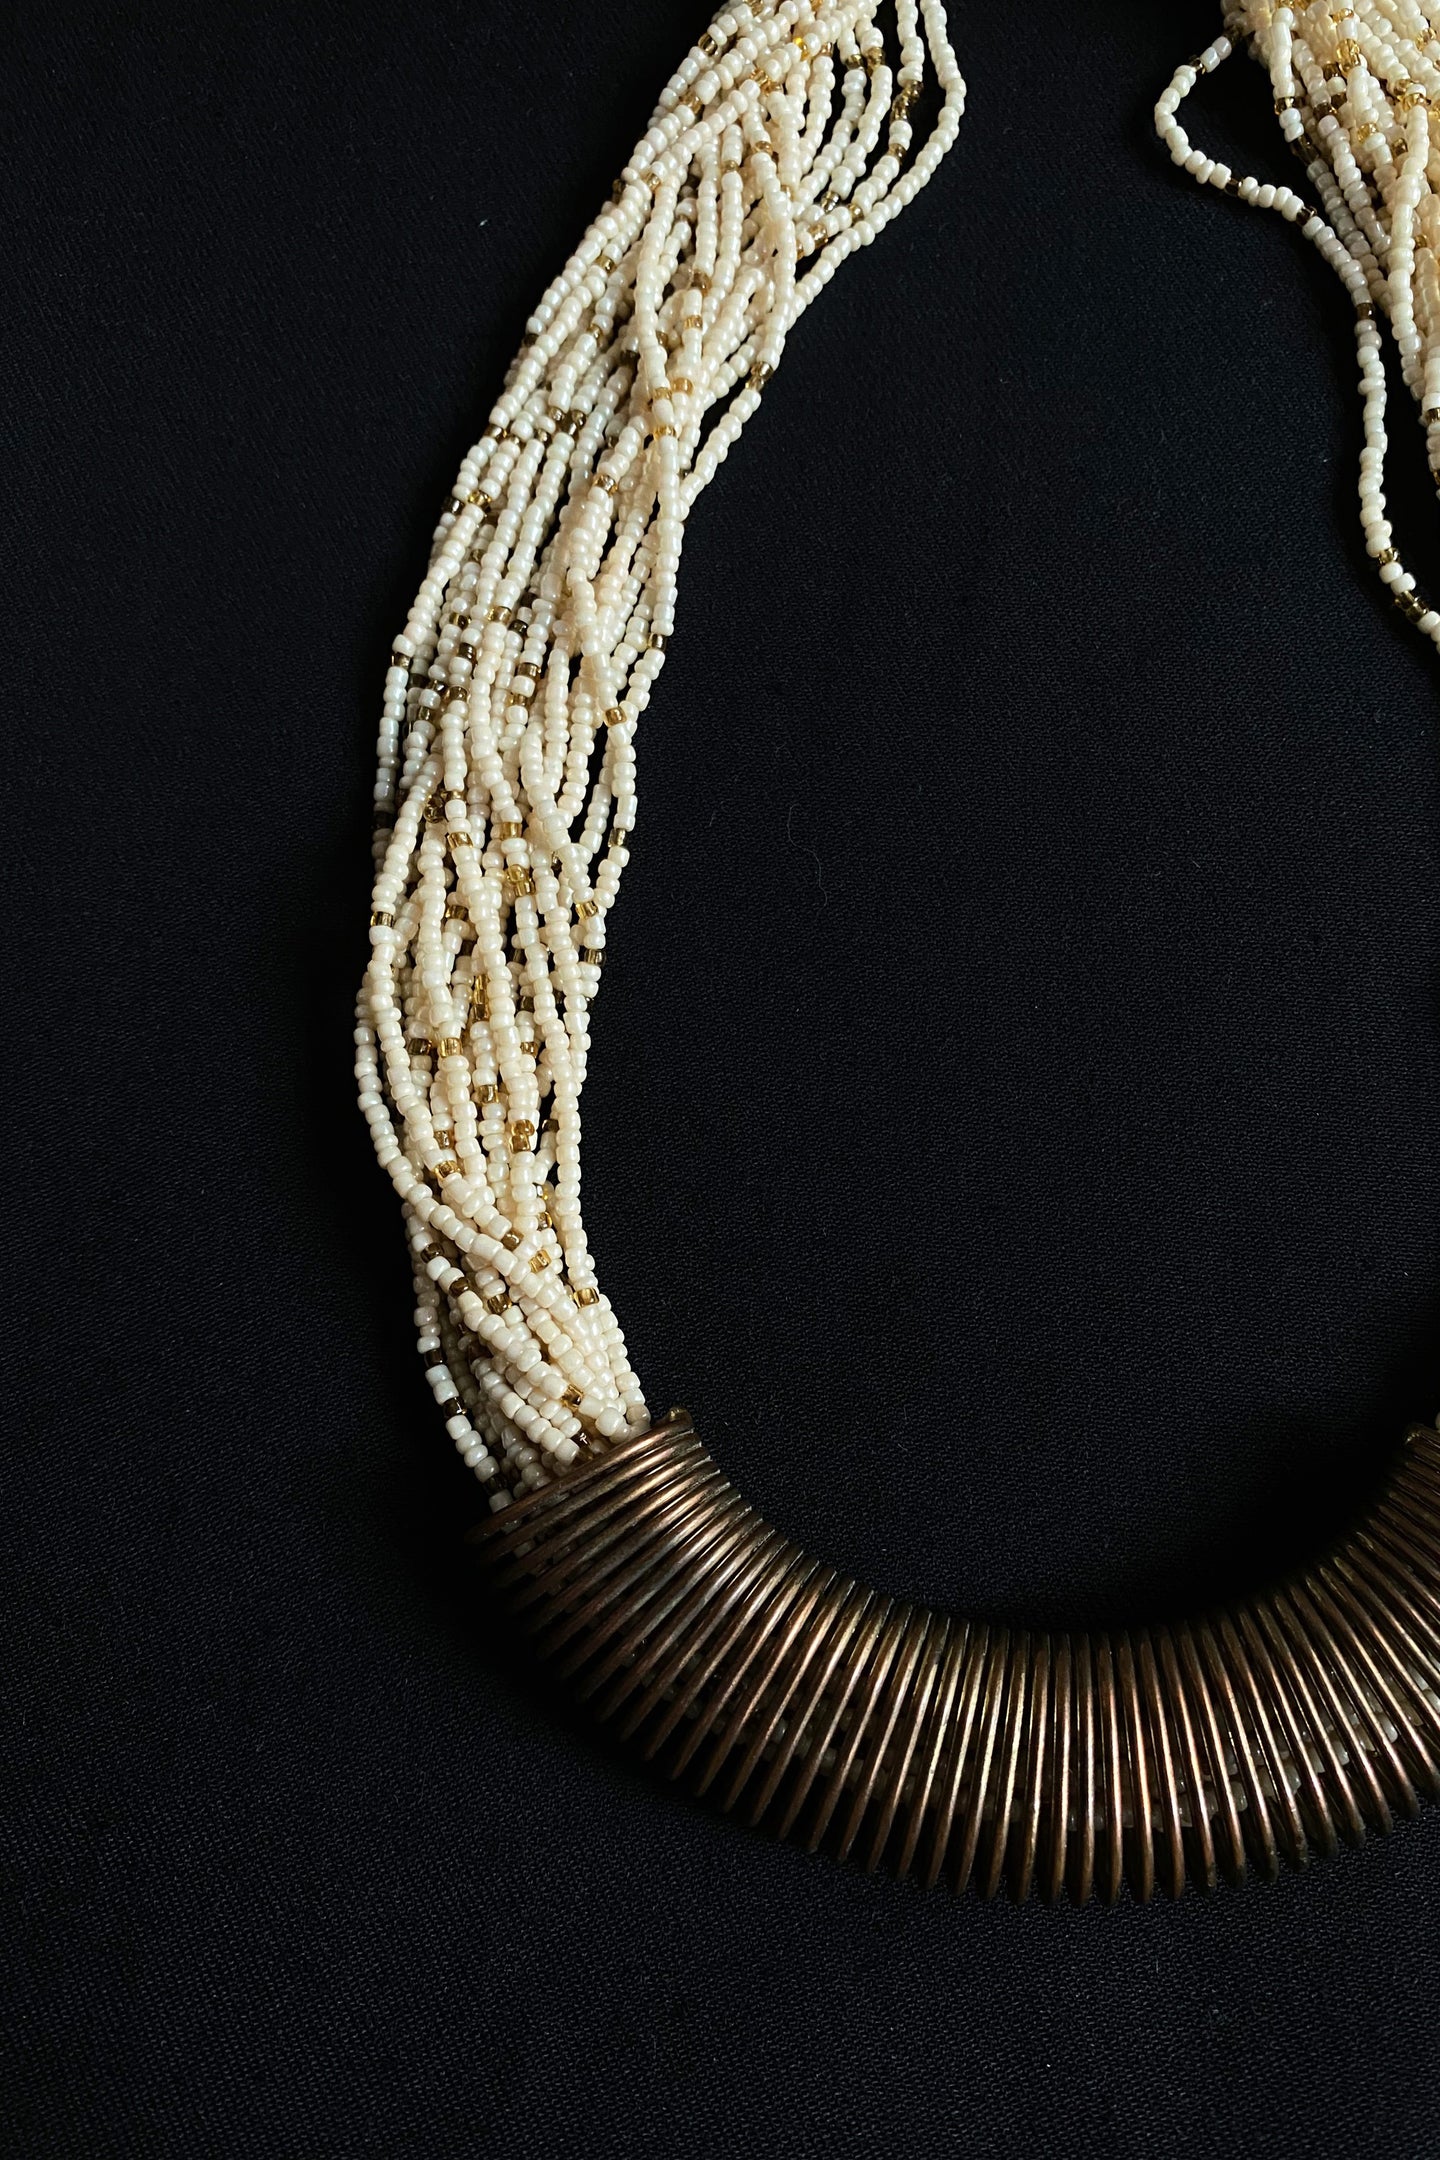 LUBOKE STRANDS BEADS NECKLACE